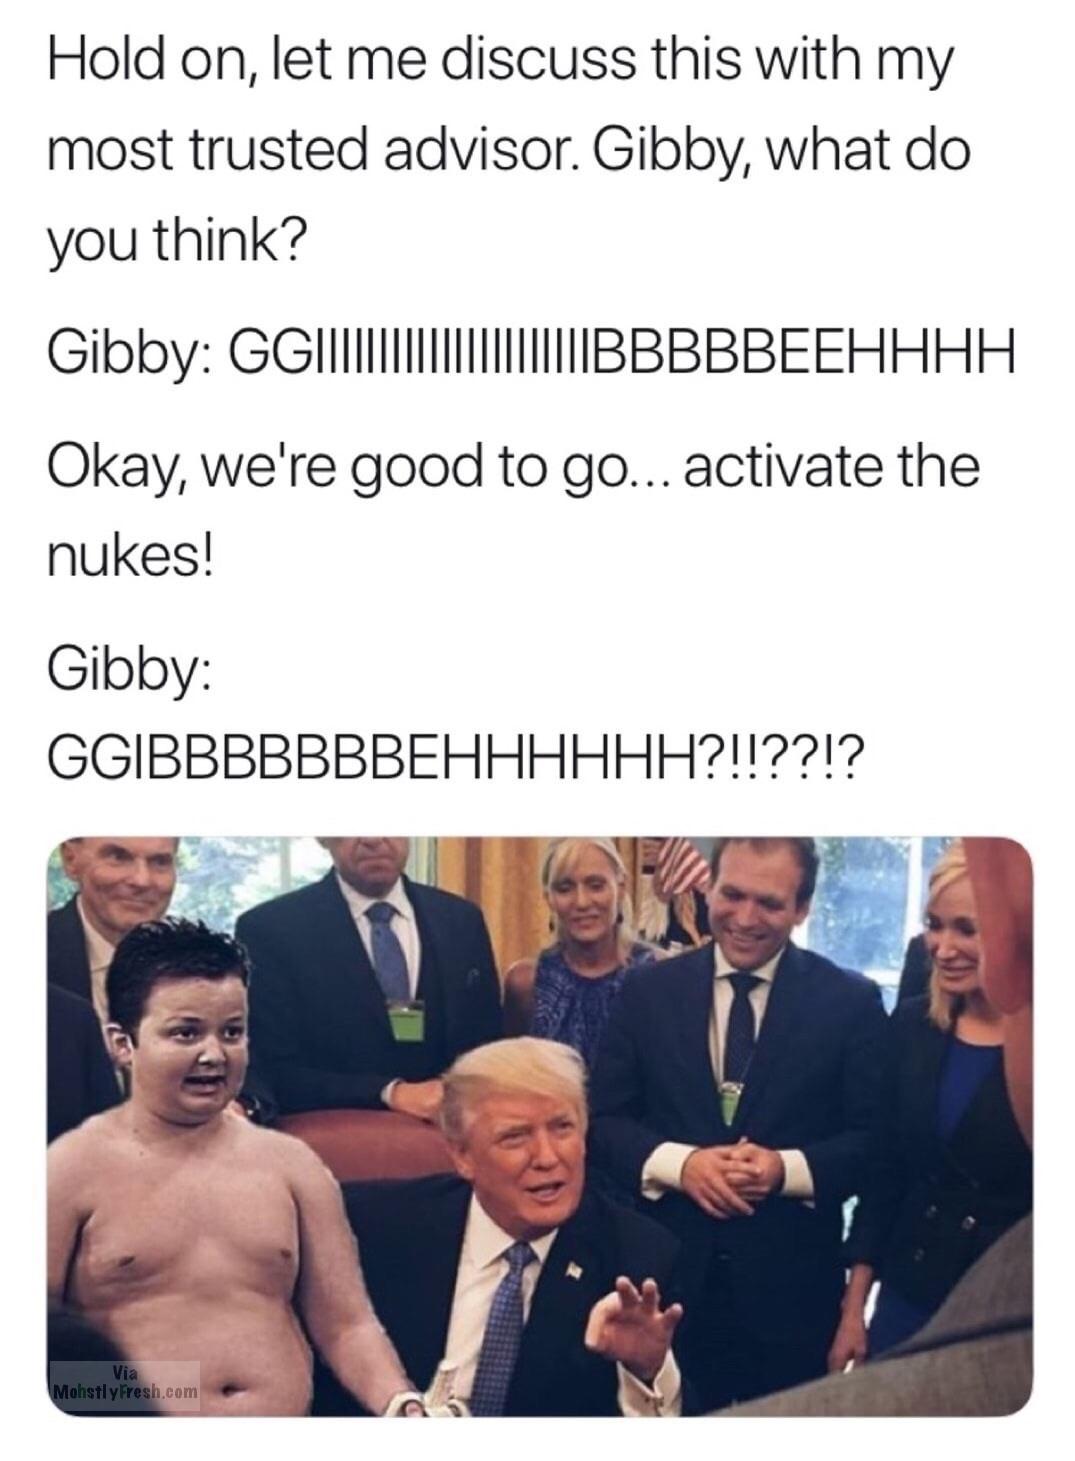 muscle - Hold on, let me discuss this with my most trusted advisor. Gibby, what do you think? Gibby Ggi|||||Bbbbbeehhhh Okay, we're good to go... activate the nukes! Gibby Ggibbbbbbbehhhhhh?!!??!? Via Mohstly Fresh.com